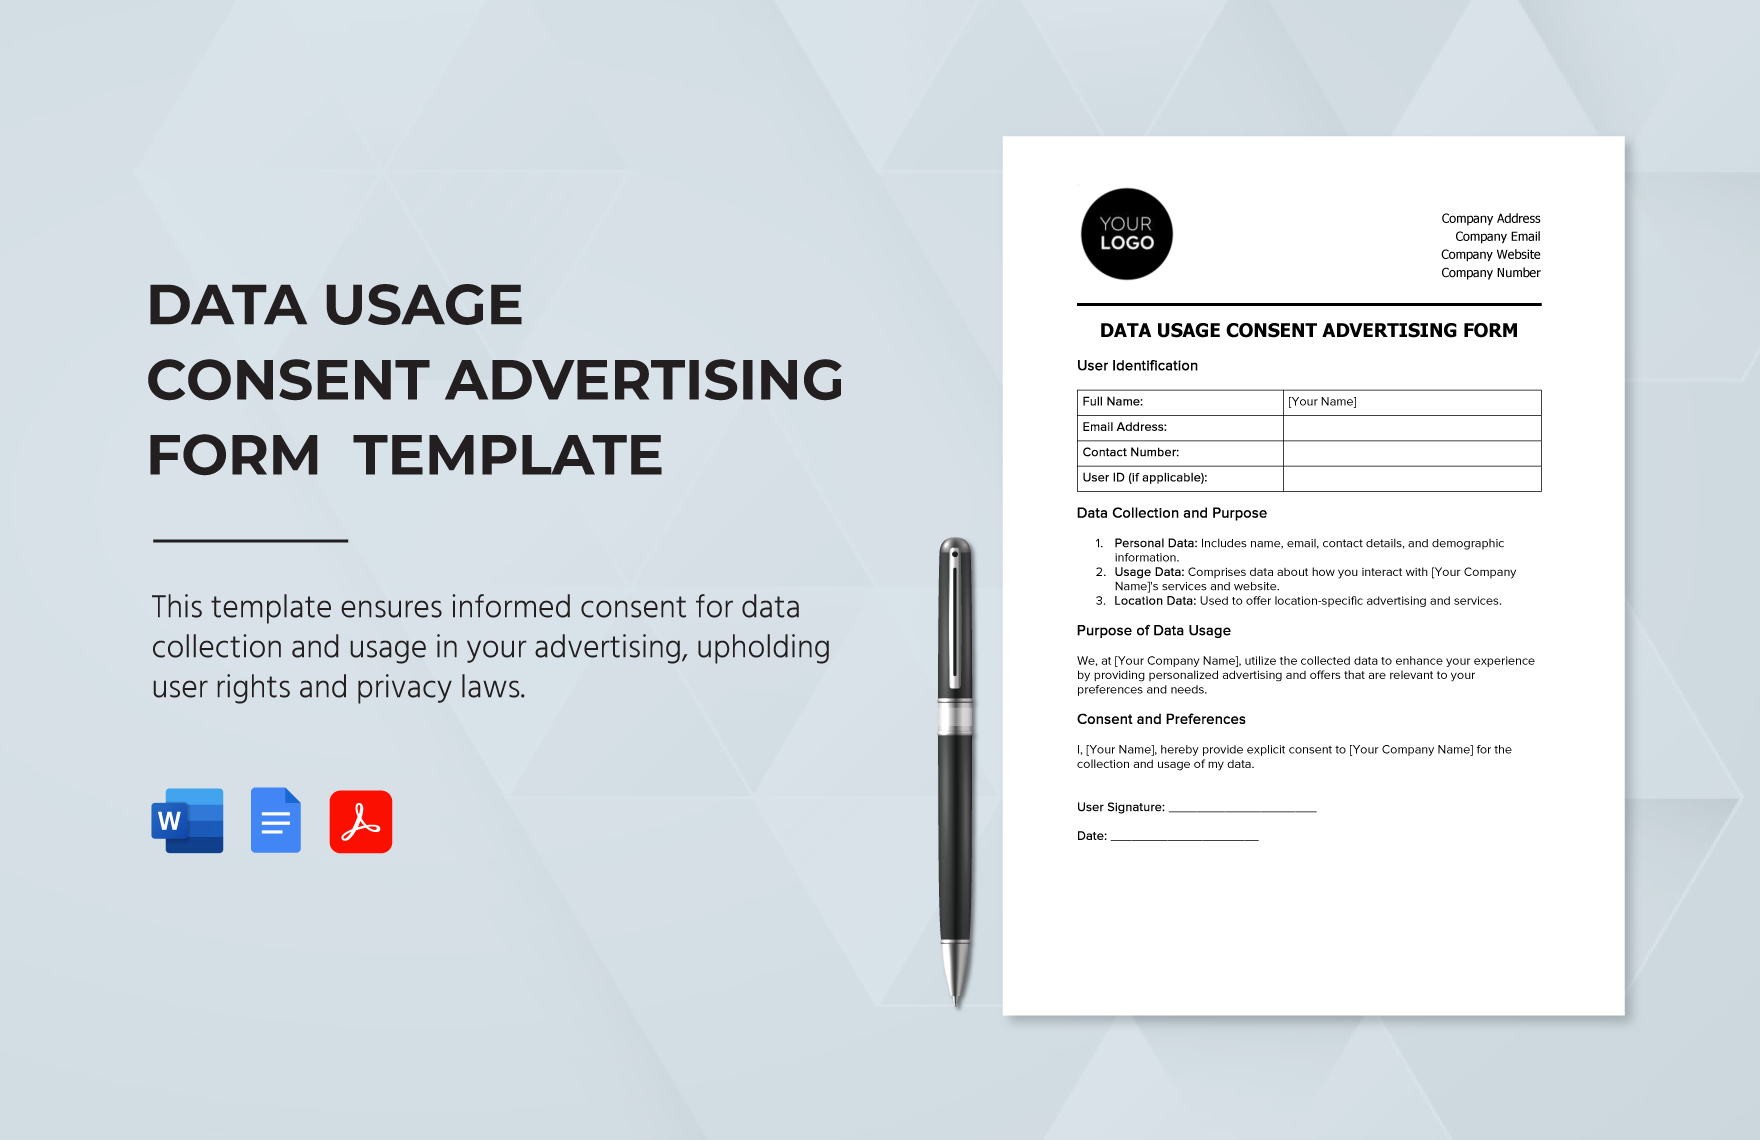 Data Usage Consent Advertising Form Template in Word, Google Docs, PDF